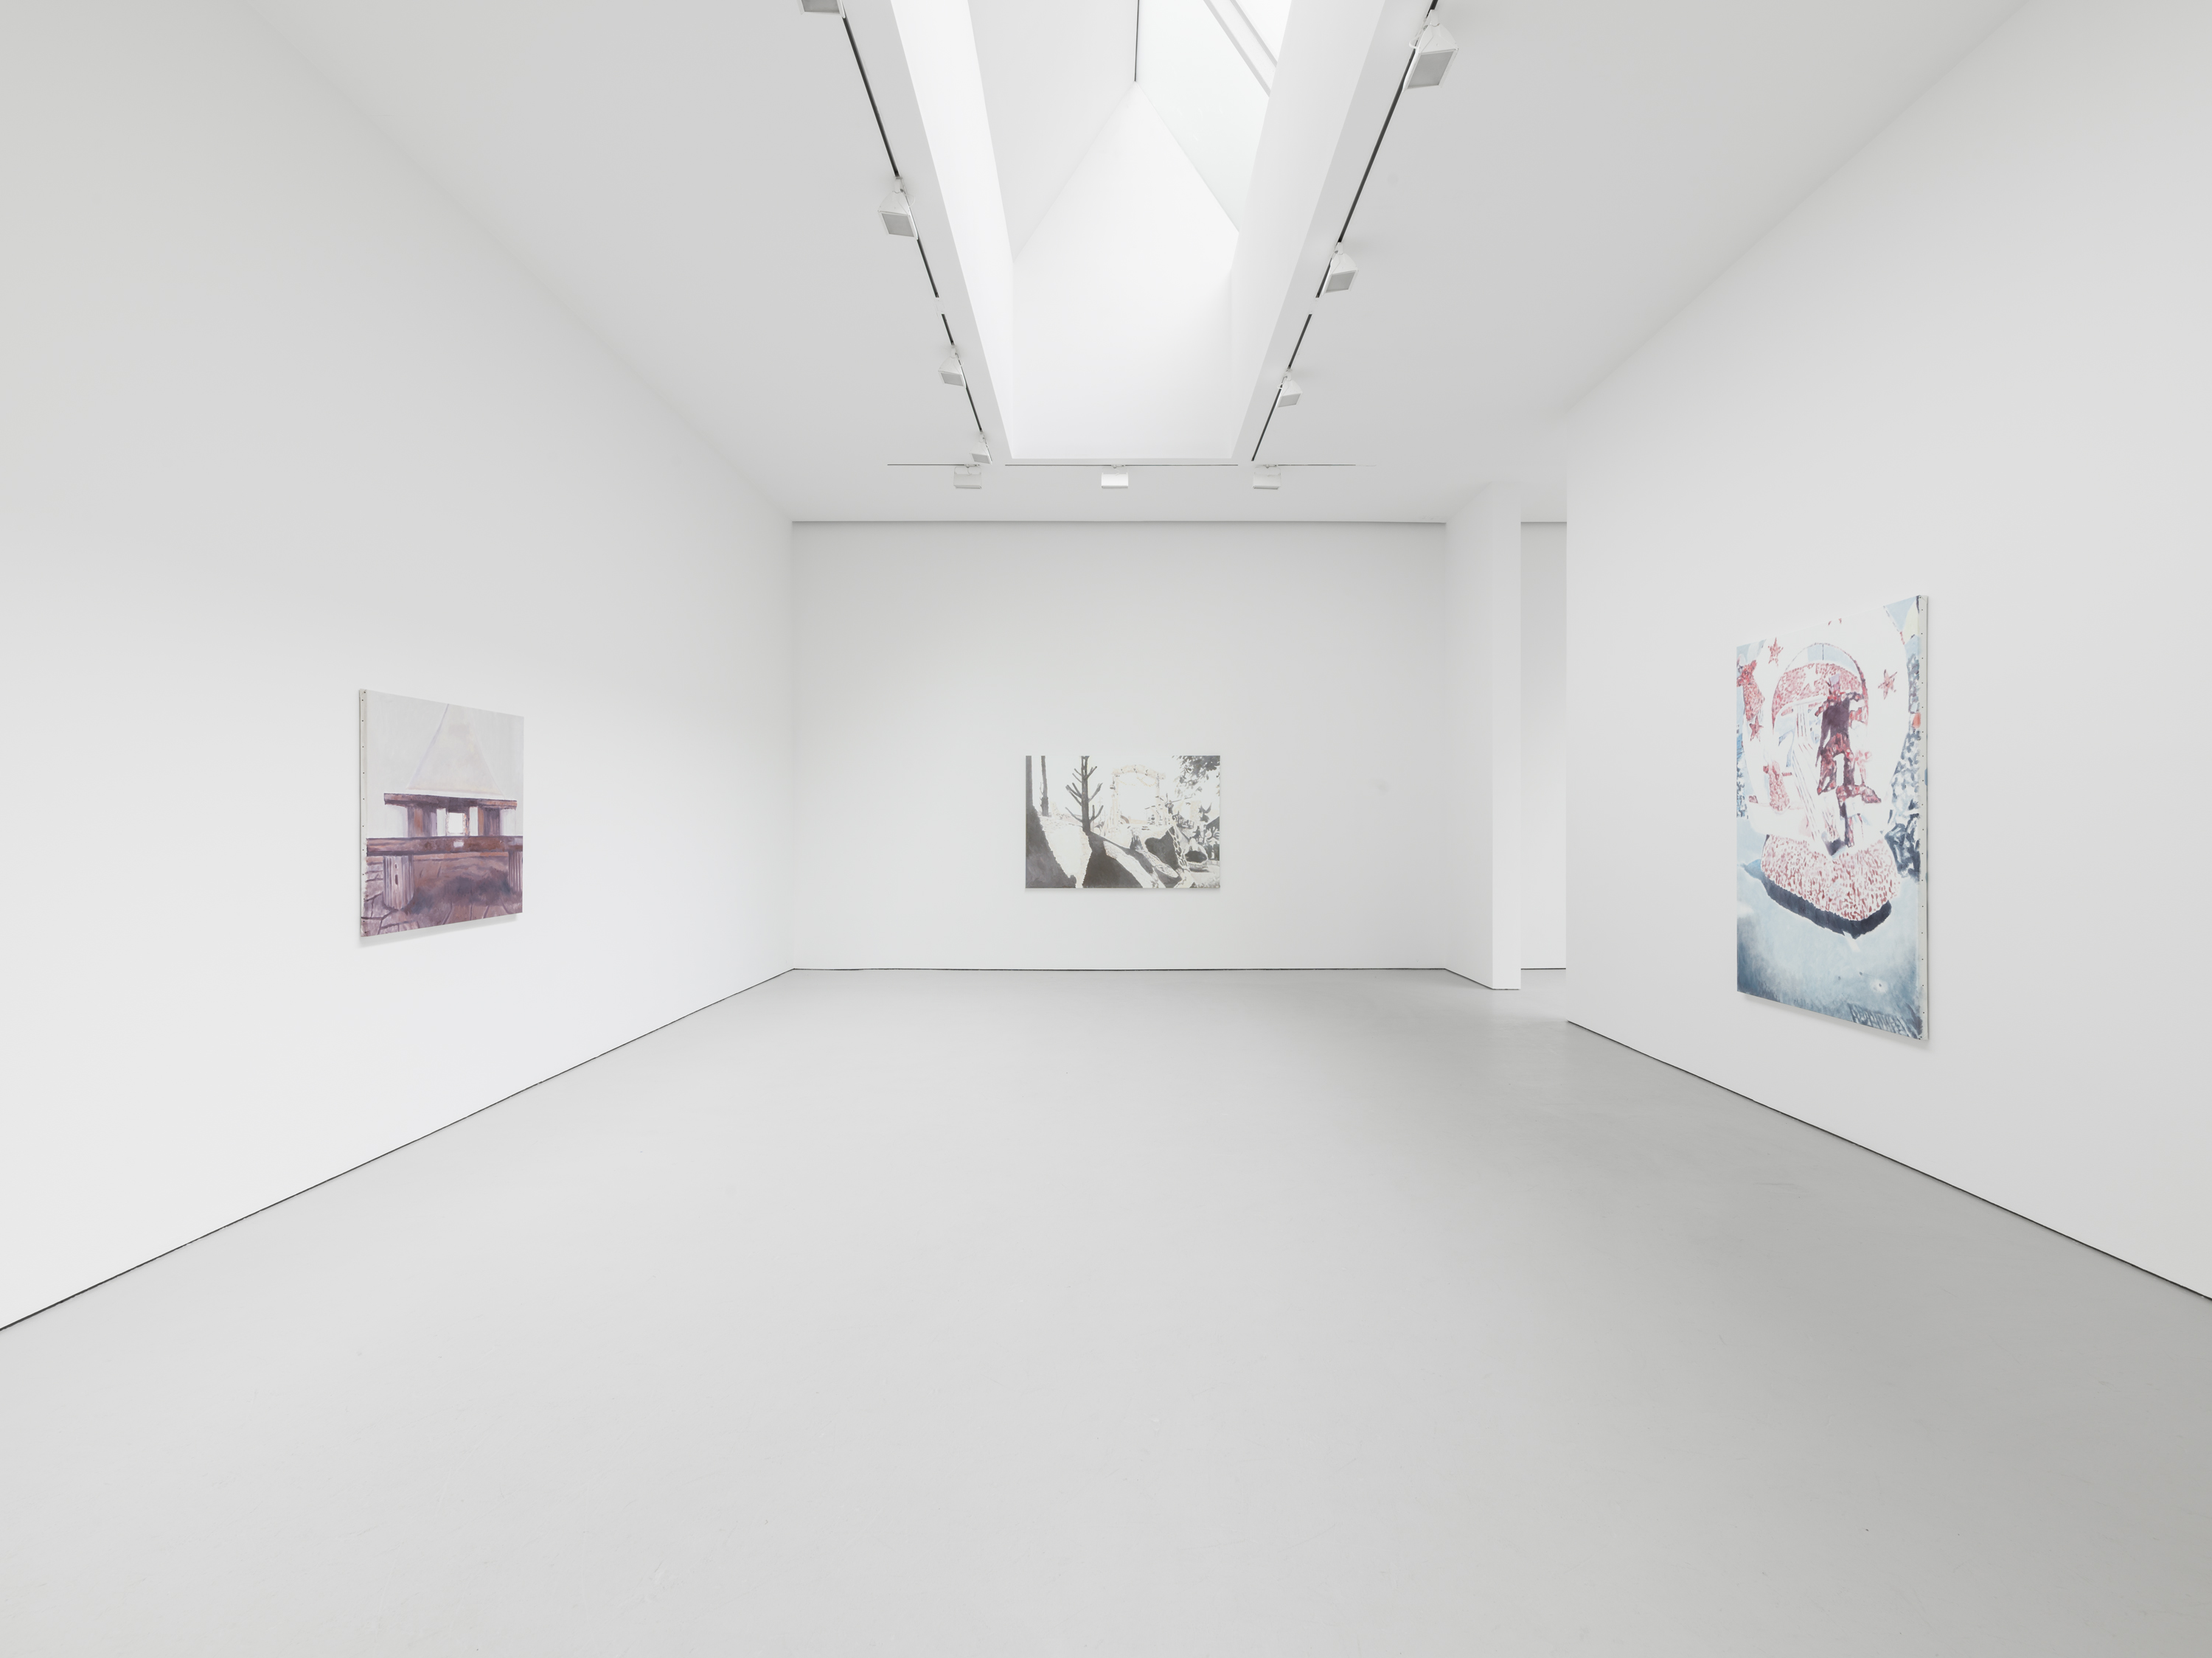 Image: Luc Tuymans, Exhibition view from the 2016 solo exhibition Le Mépris at David Zwirner, New York. Courtesy David Zwirner, New York/London.